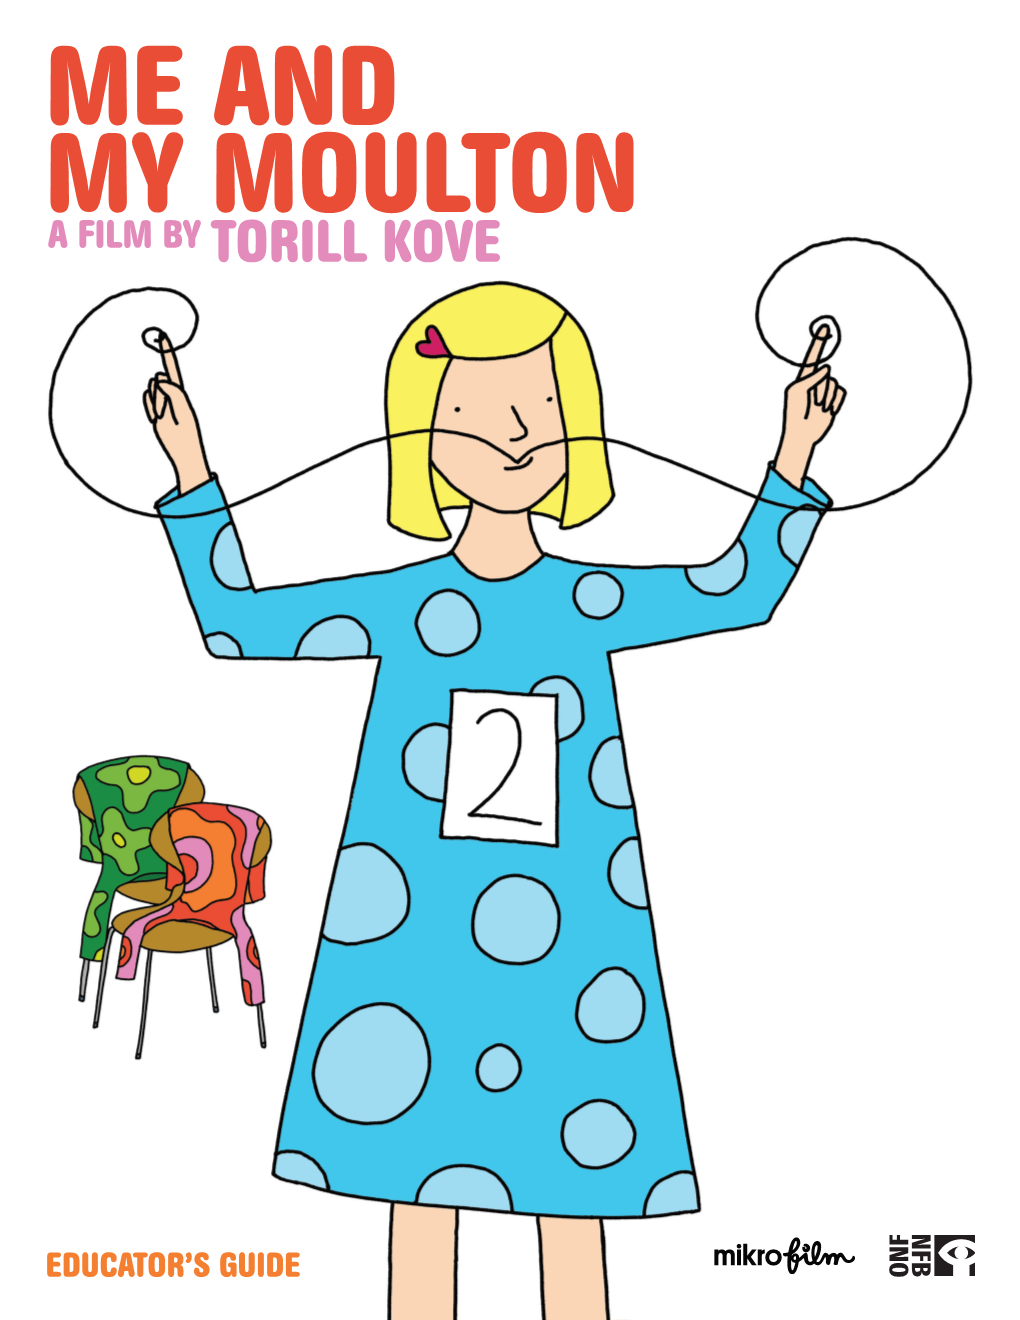 Me and My Moulton a Film by Torill Kove